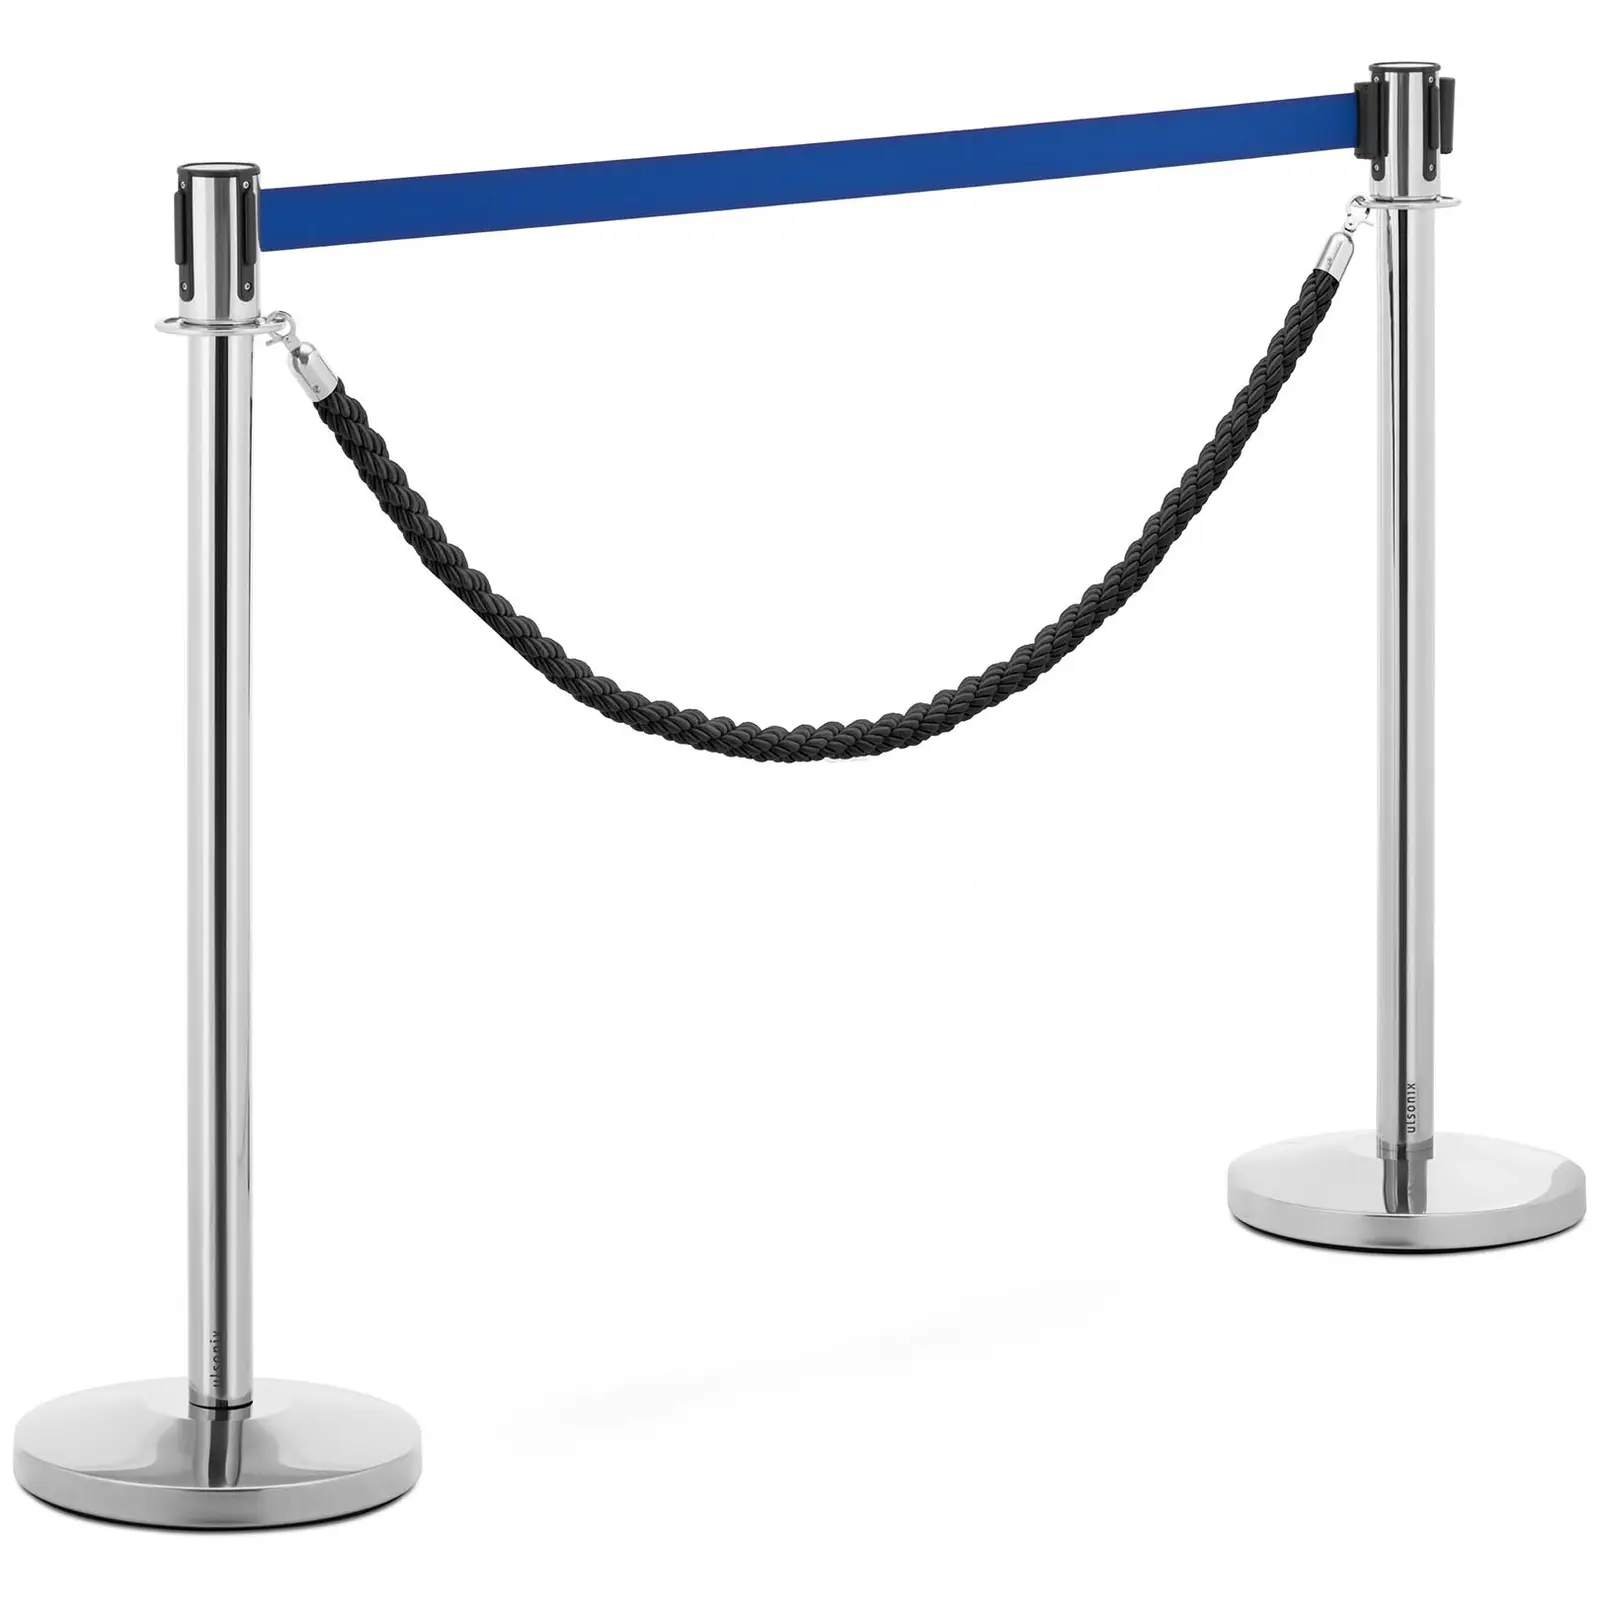 2 Barrier Posts - with strap and cord - 200 cm - polished stainless steel